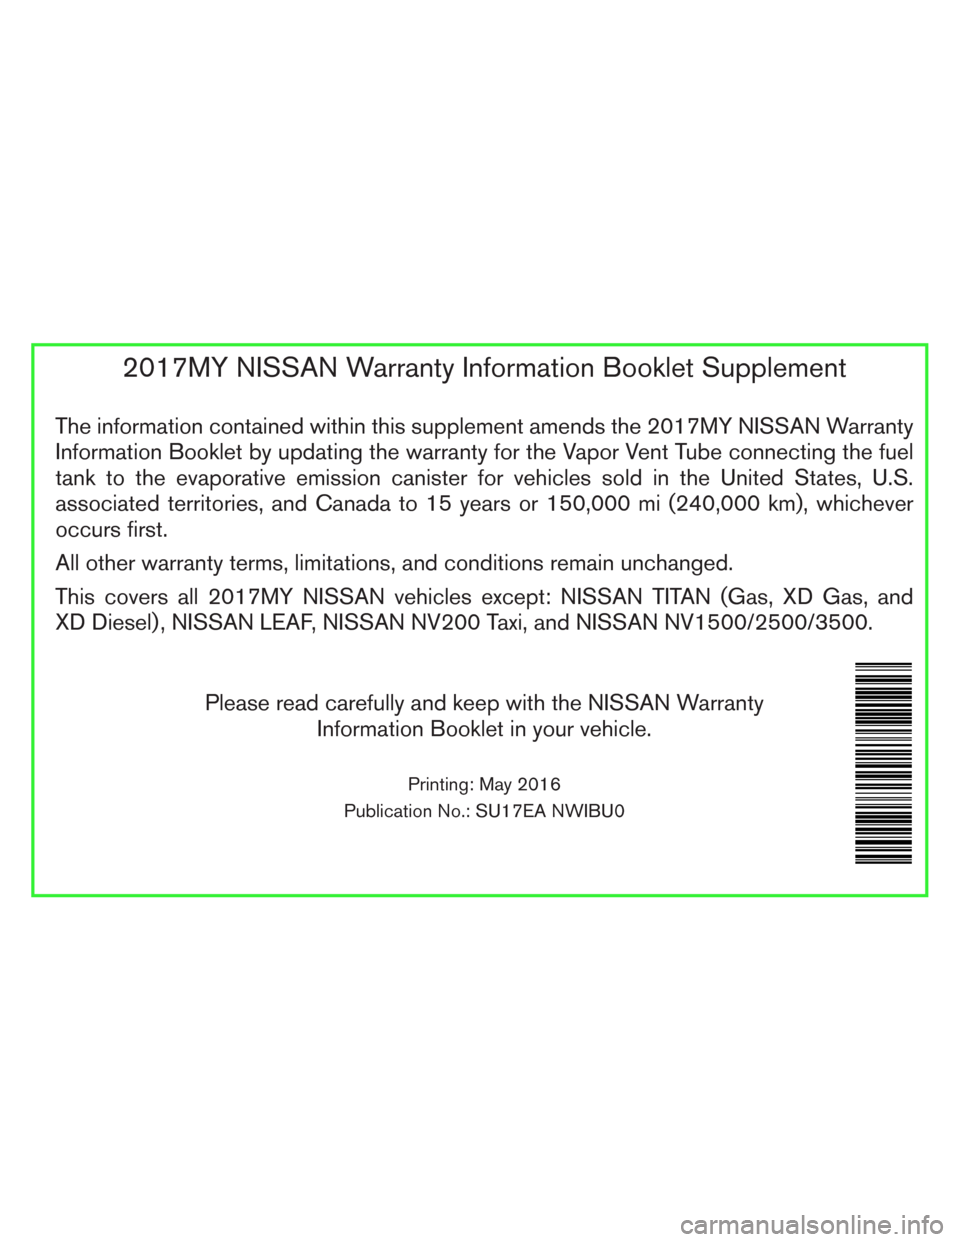 NISSAN TITAN 2017 2.G Warranty Booklet 2017MY NISSAN Warranty Information Booklet Supplement
The information contained within this supplement amends the 2017MY NISSAN Warranty
Information Booklet by updating the warranty for the Vapor Vent